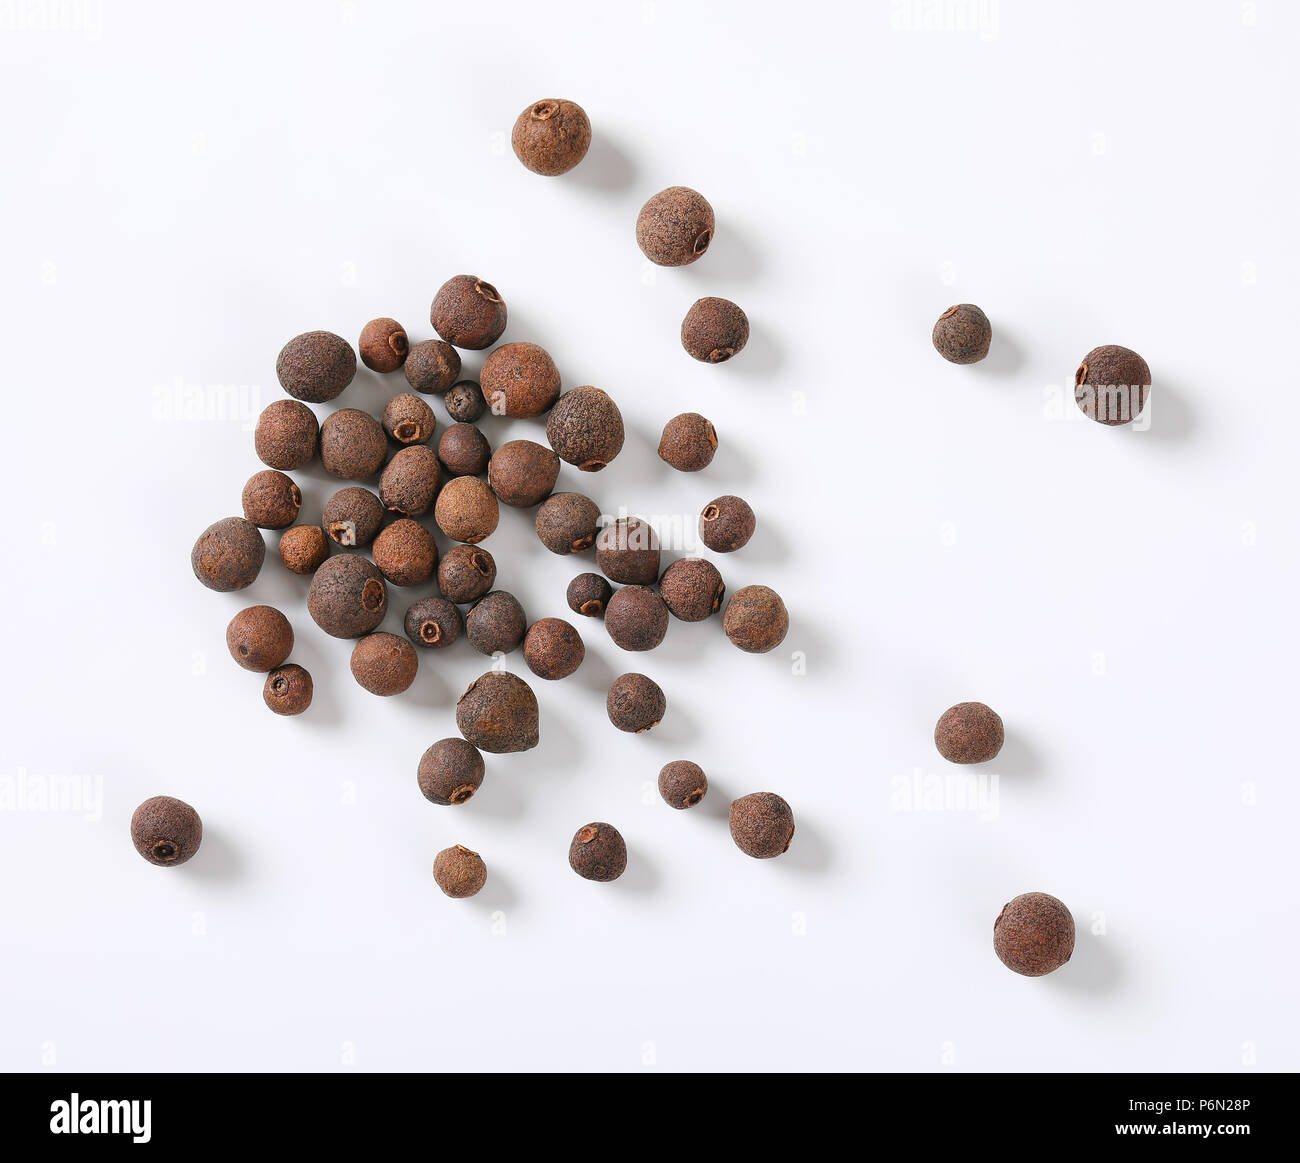 handful of whole allspice berries on white background Stock Photo